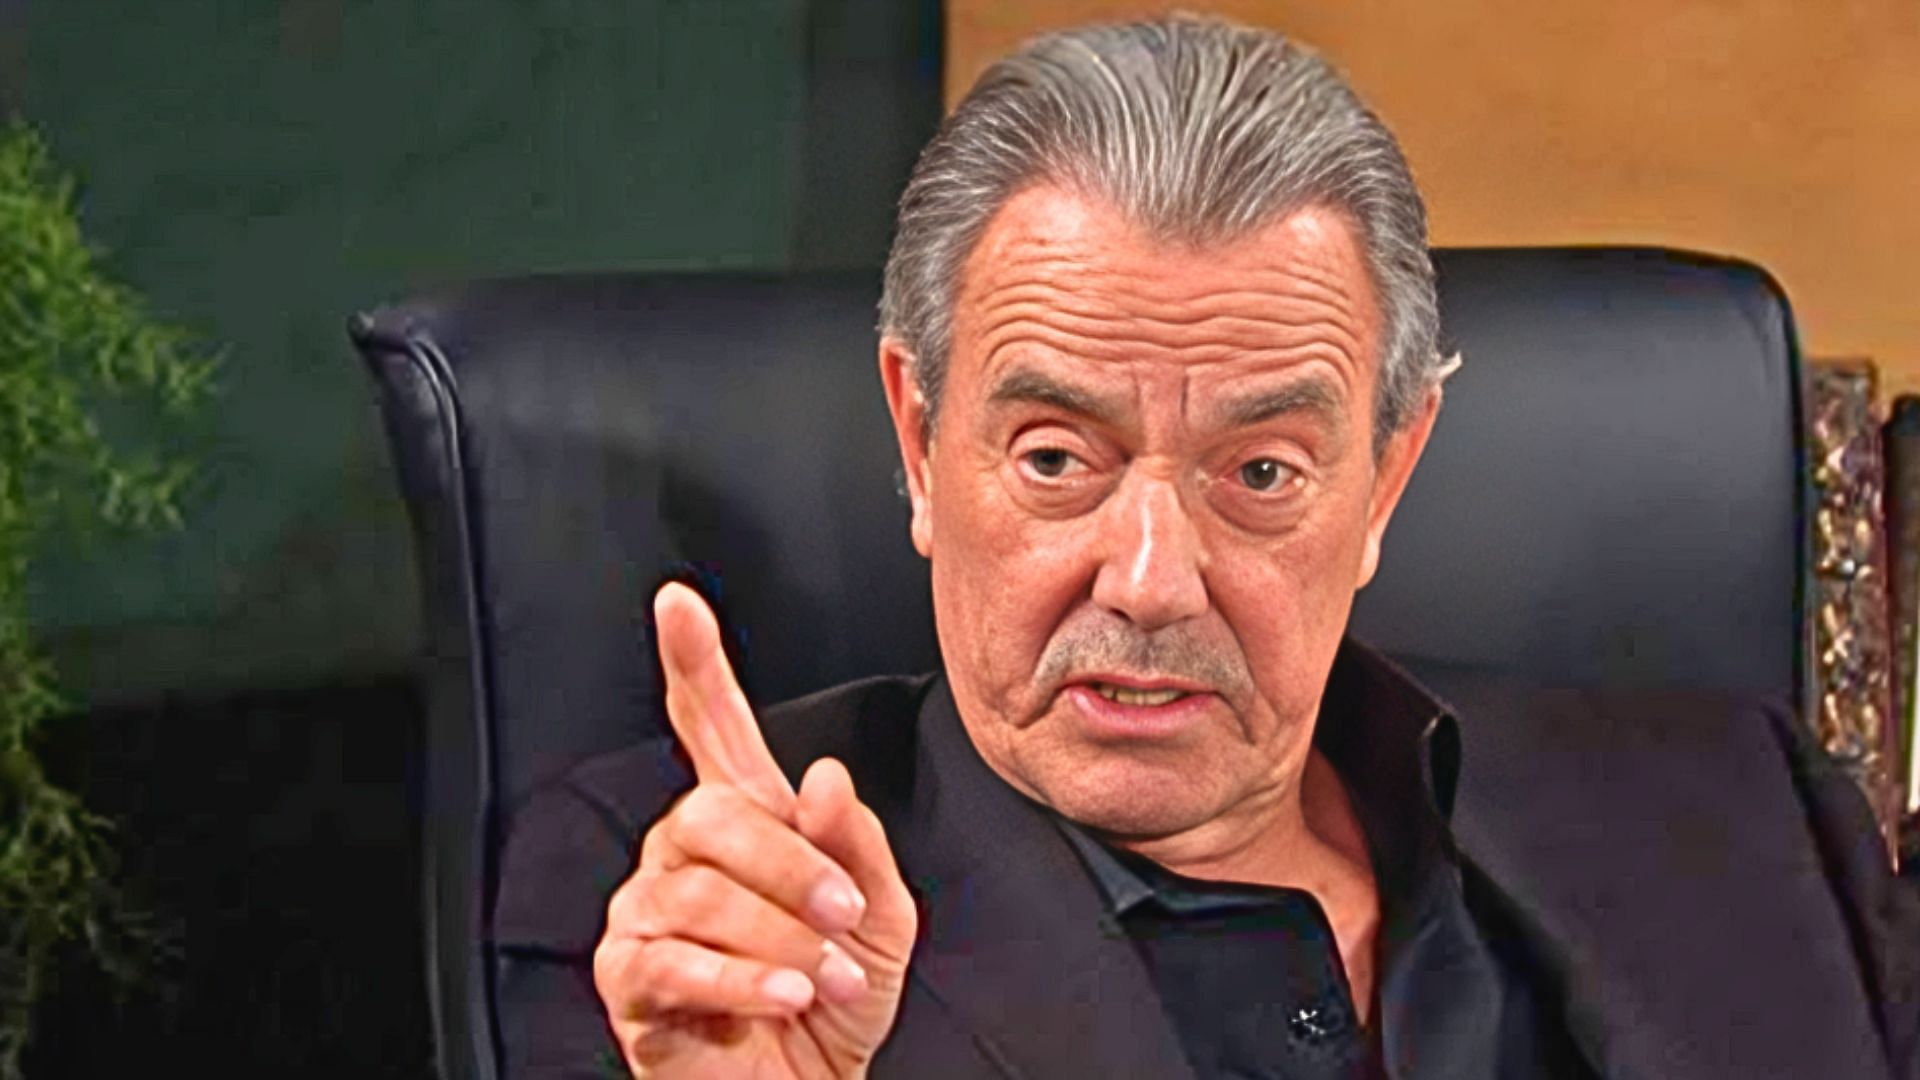 Eric Braeden as Victor Newman in a still from The Young and the Restless (Image via CBS)